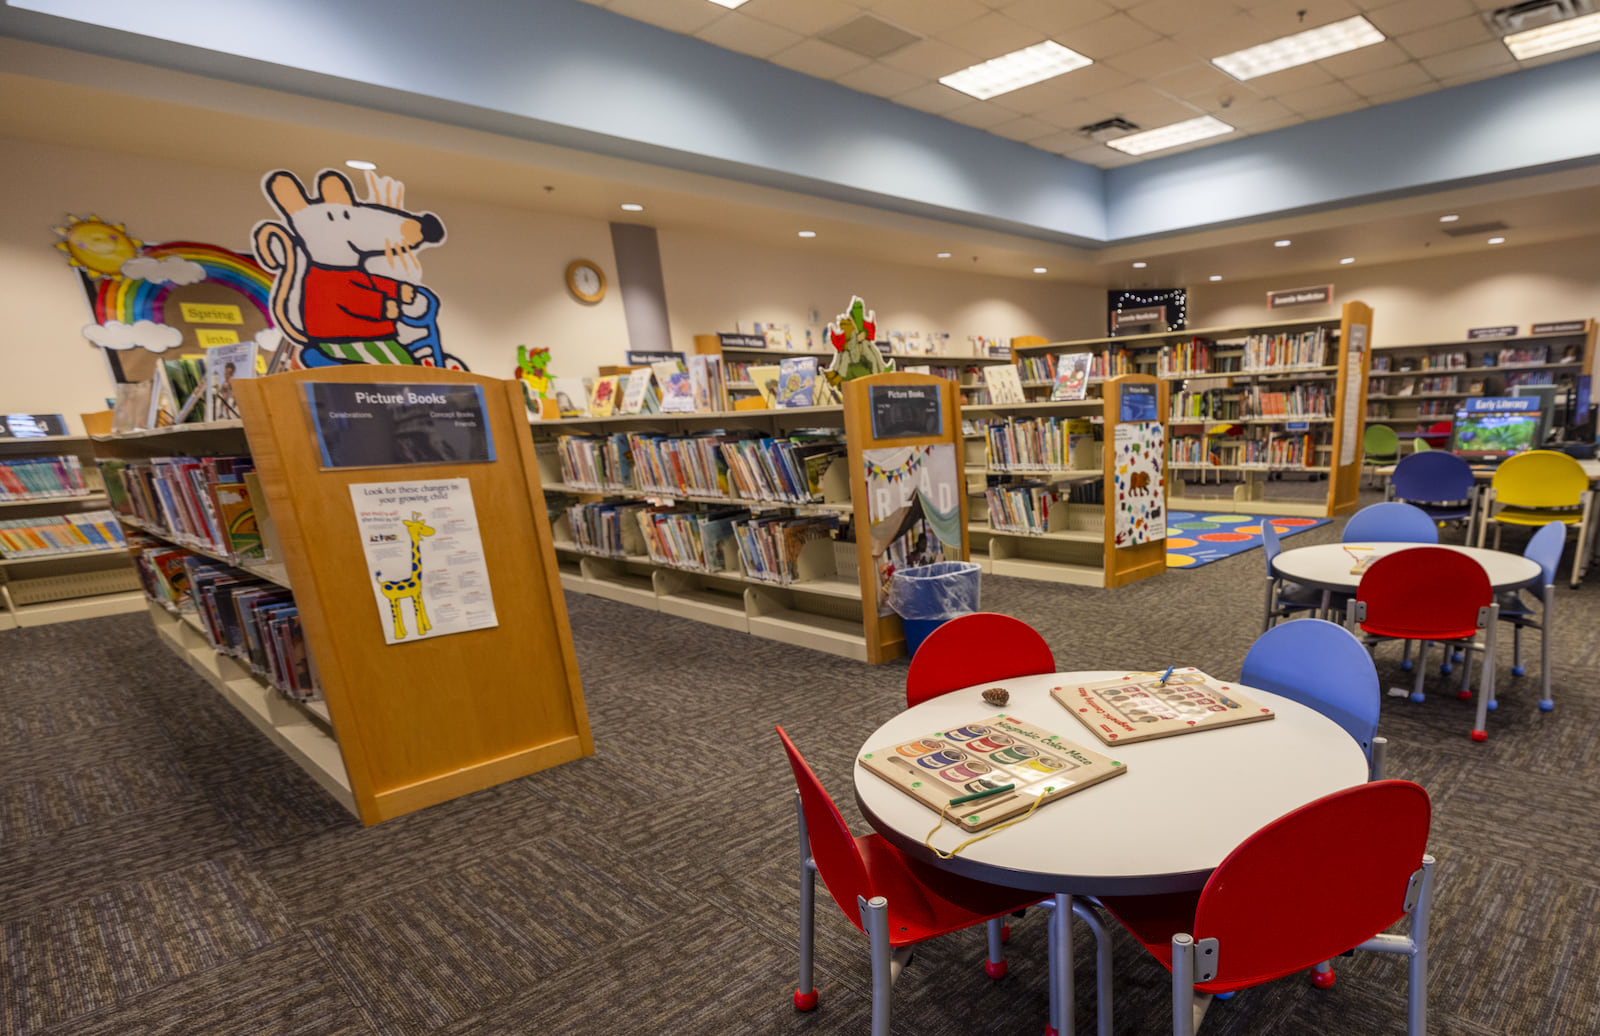 Photo of the kids area’s tables and shelves